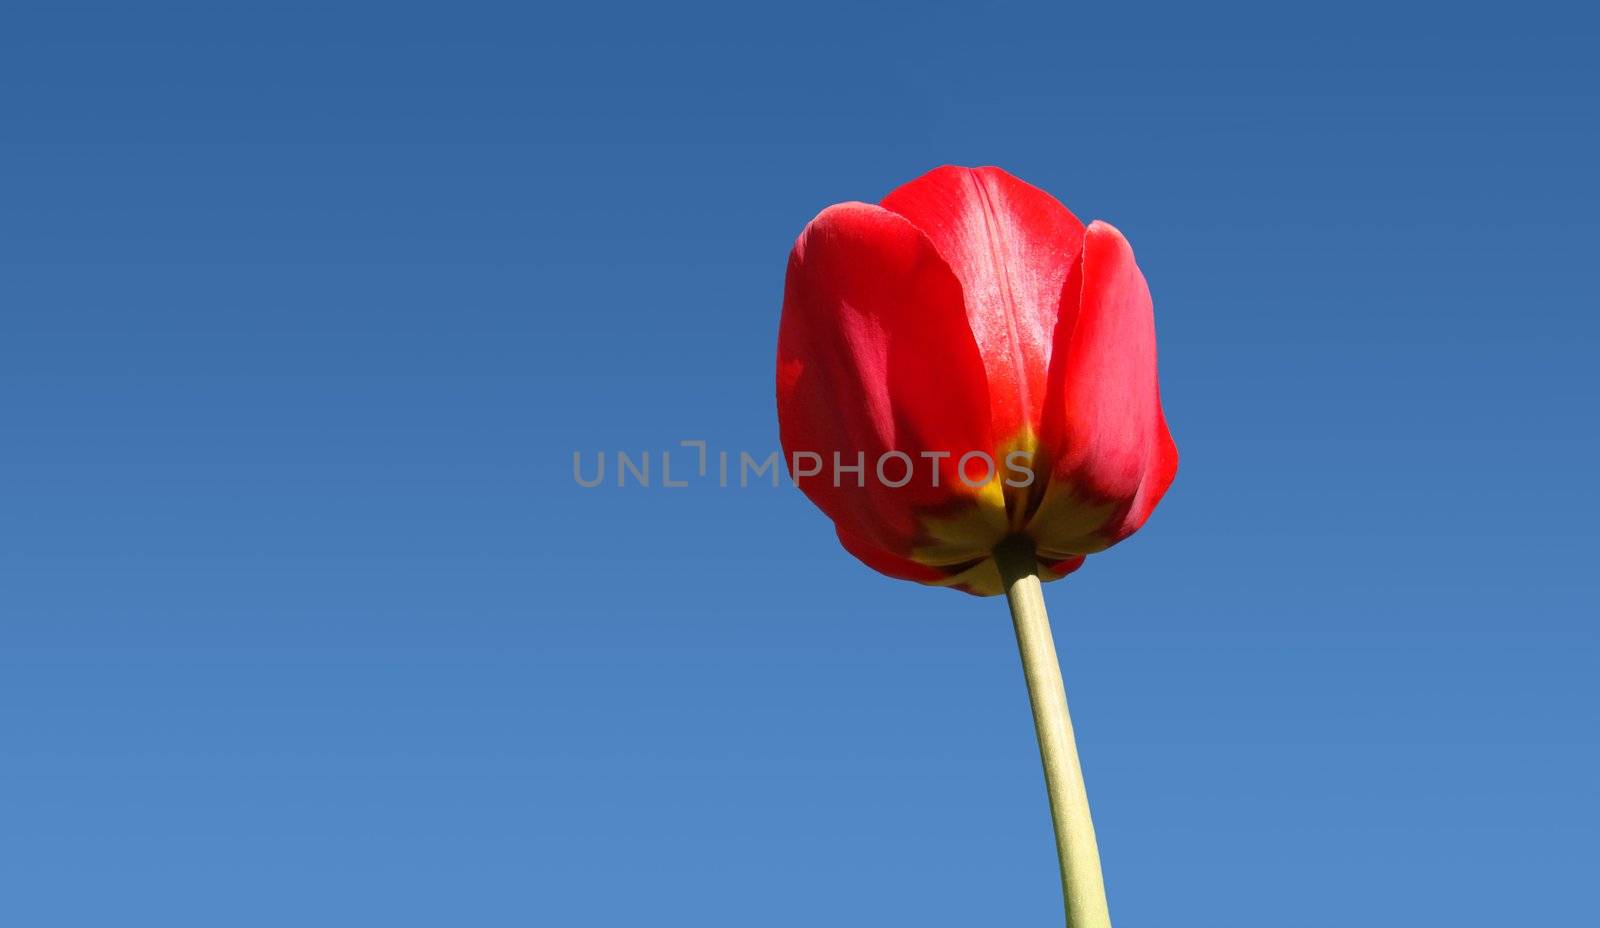 Close-up and worm eye view of a red tulip and blue sky by Mirage3